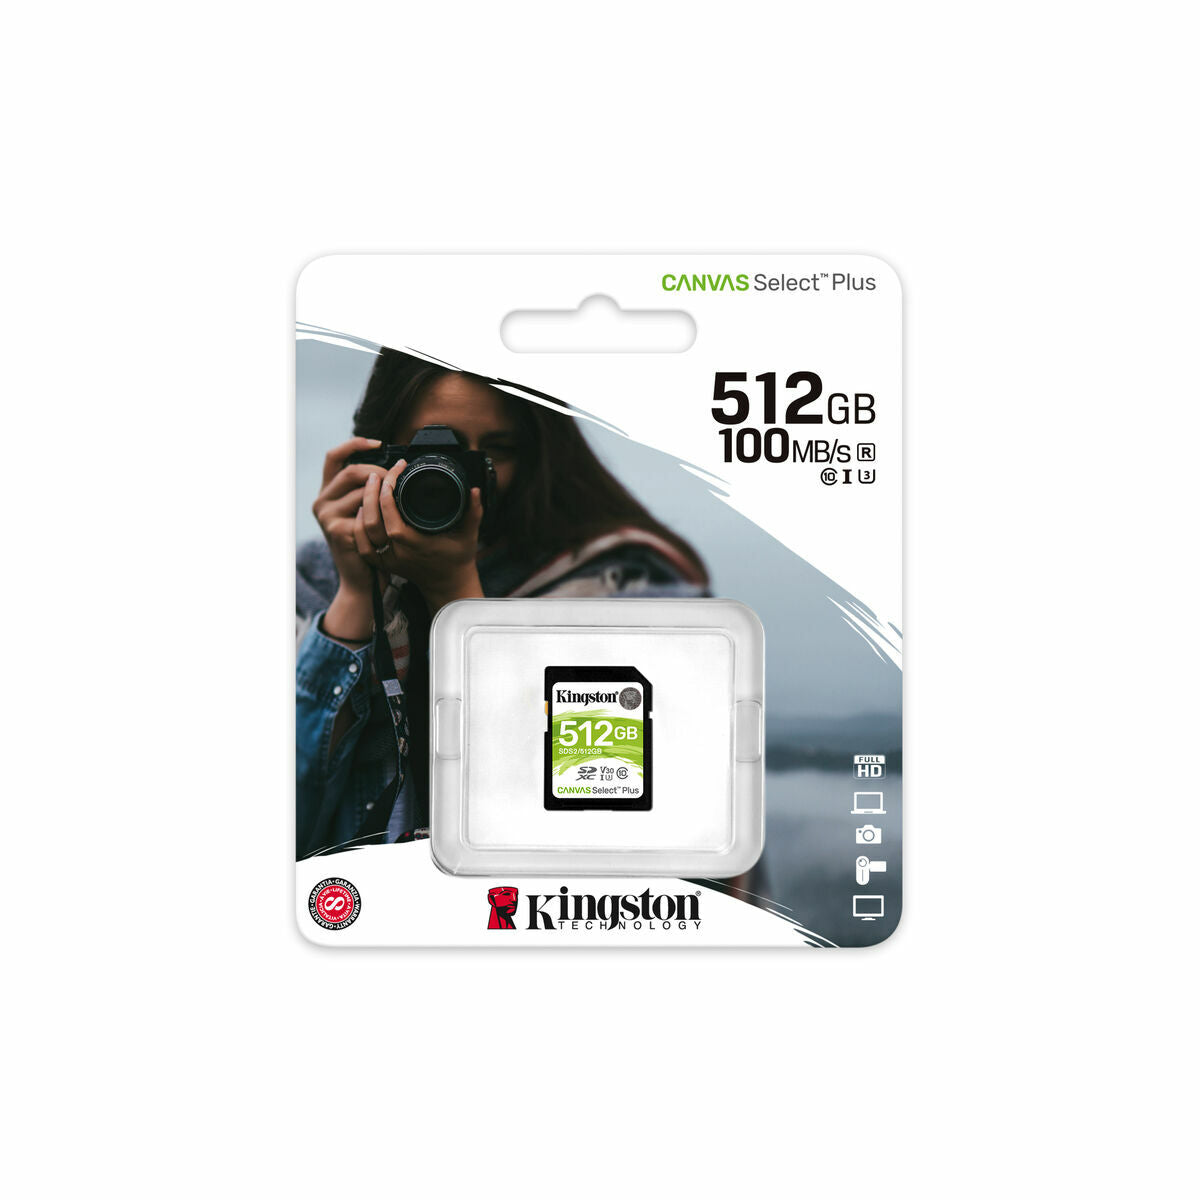 Memory Card Kingston Canvas Select Plus 512 GB, Kingston, Computing, Data storage, memory-card-kingston-canvas-select-plus-512-gb, Brand_Kingston, category-reference-2609, category-reference-2803, category-reference-2813, category-reference-t-19685, category-reference-t-19909, category-reference-t-21355, category-reference-t-25632, category-reference-t-29824, computers / components, Condition_NEW, Price_50 - 100, Teleworking, RiotNook